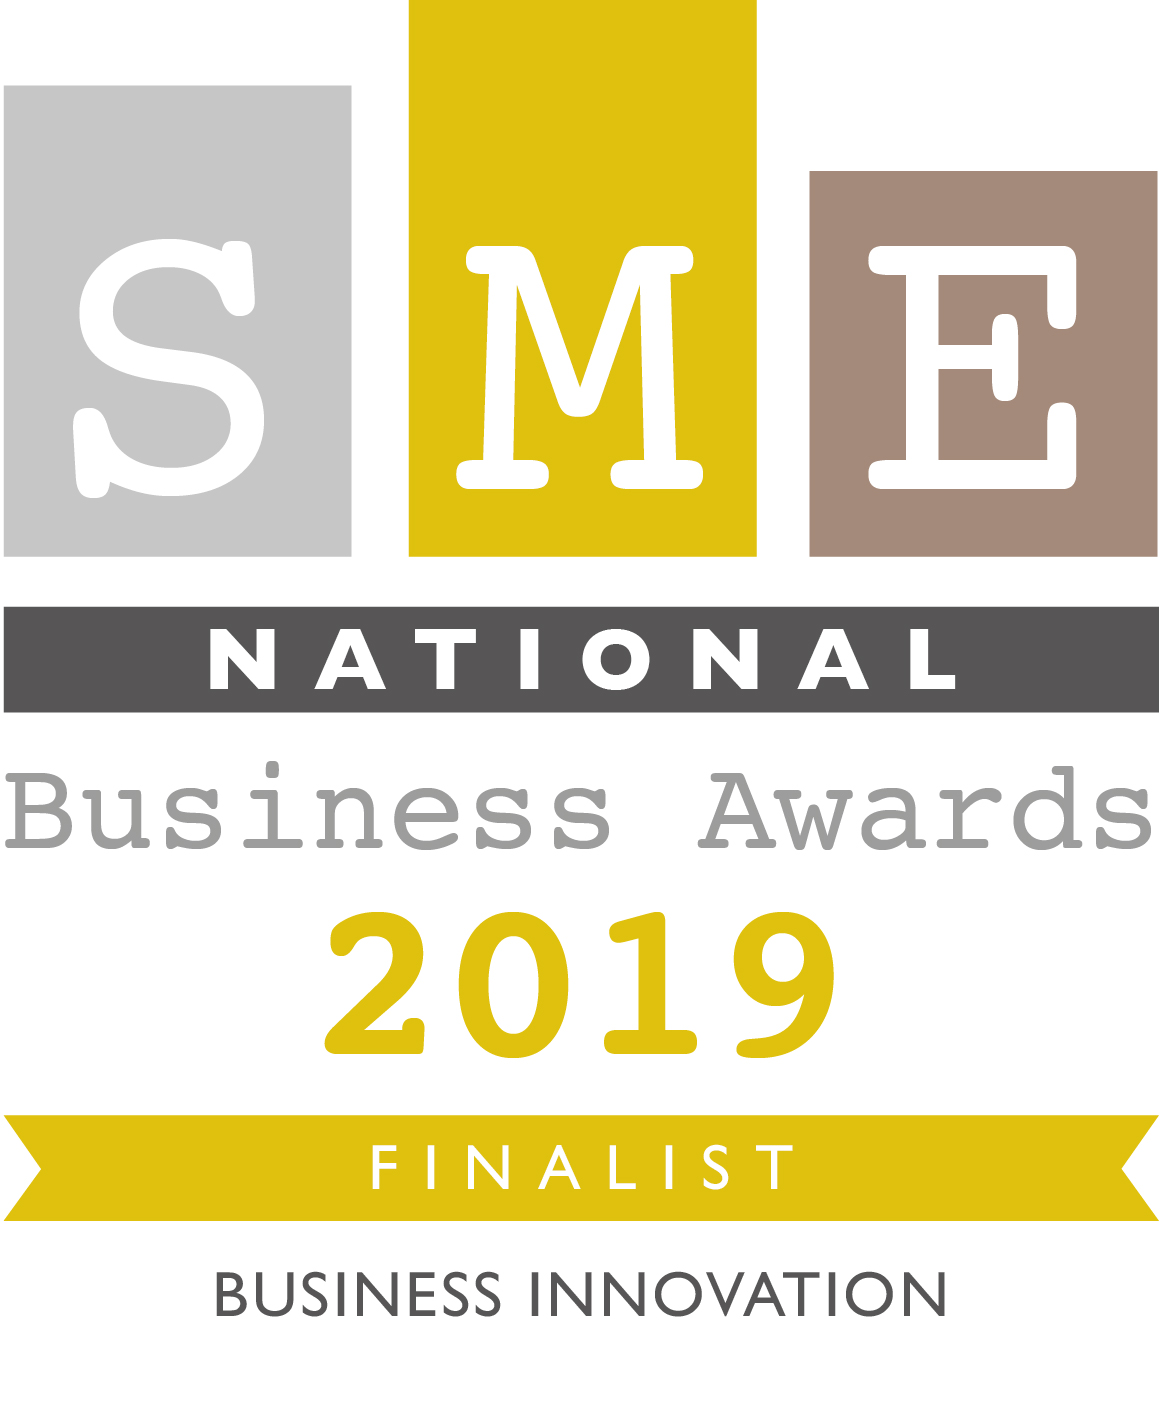 CareLineLive Nominated as Finalist for Latest Innovations in SME National Business Awards